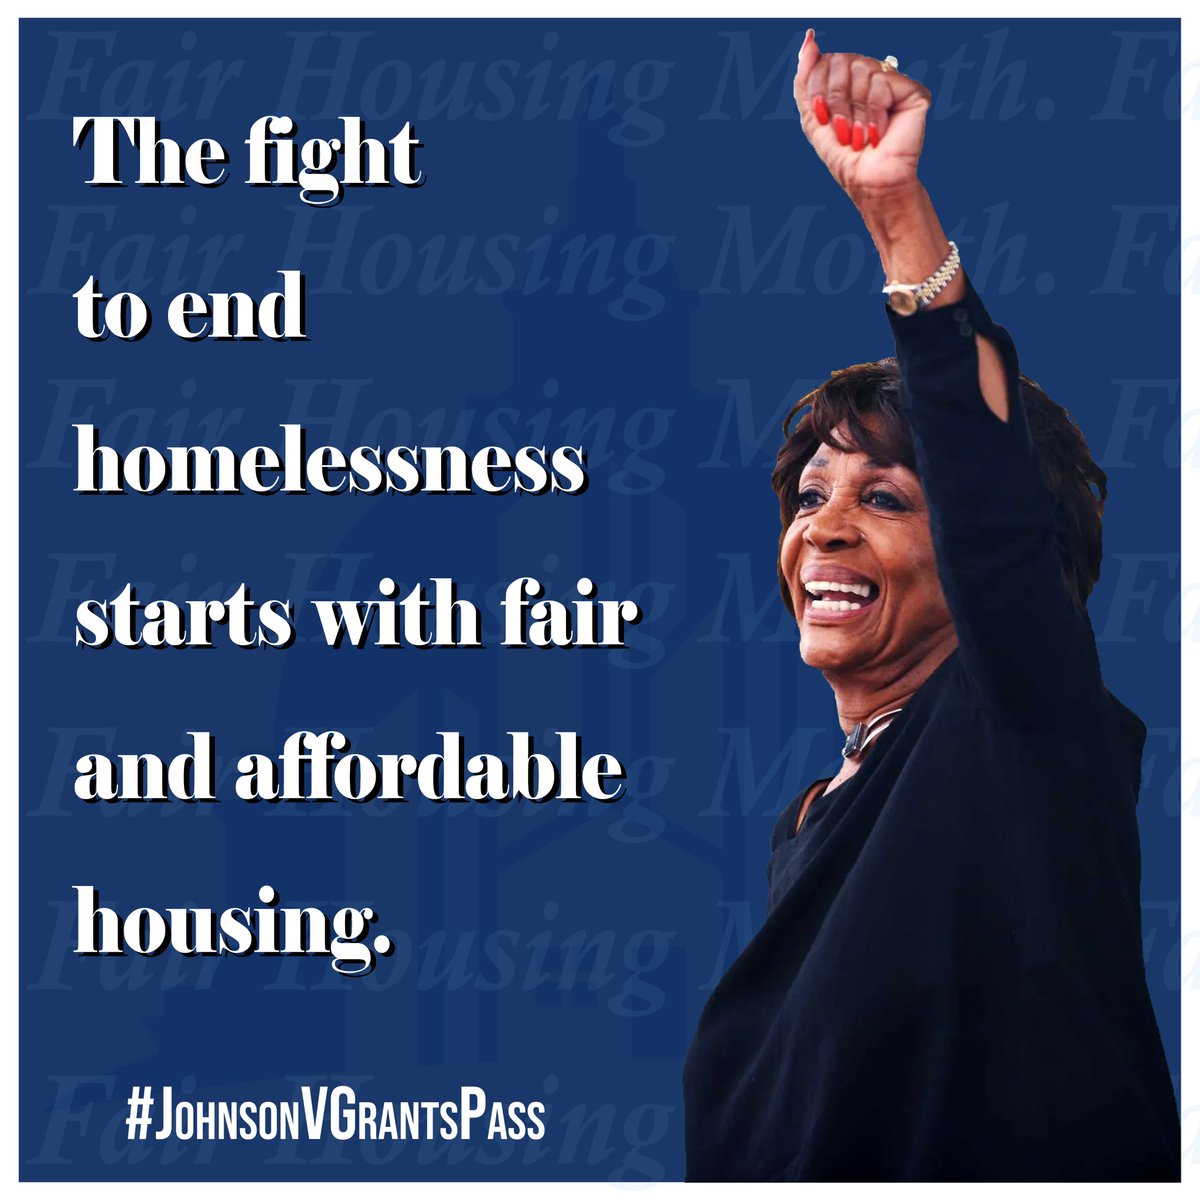 As #SCOTUS⚖️ prepares to hear #JohnsonVGrantsPass, it's critical to emphasize that HOMELESSNESS IS NOT A CRIME. We must focus on long-term solutions like RM @RepMaxineWaters' “Housing Crisis Response Act,” “Ending Homelessness Act,” & “Downpayment Toward Equity Act” to increase